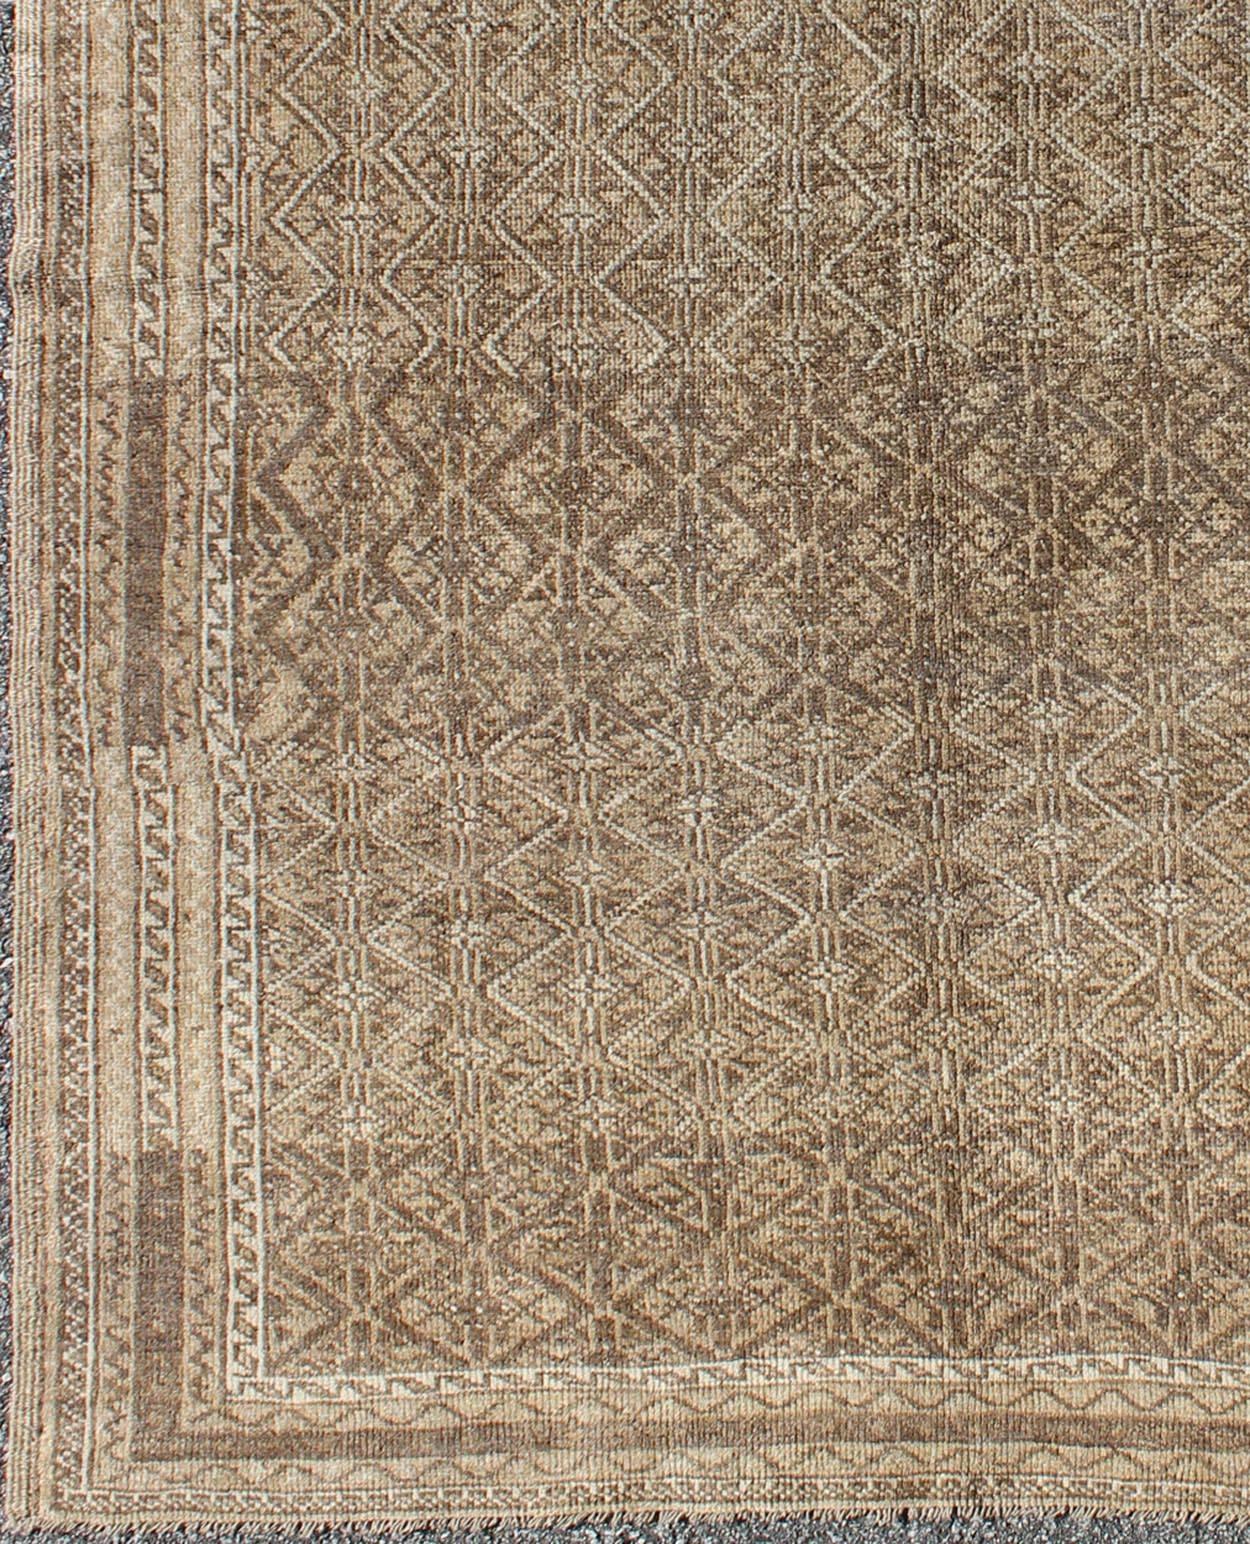 Unique Turkish Rug with Brown and Neutral Colors.
This piece is an impressive patterned and geometric rug that was handwoven during the first part of the 20th century in Turkey. With an all-over diamond and lattice design, the color palette and